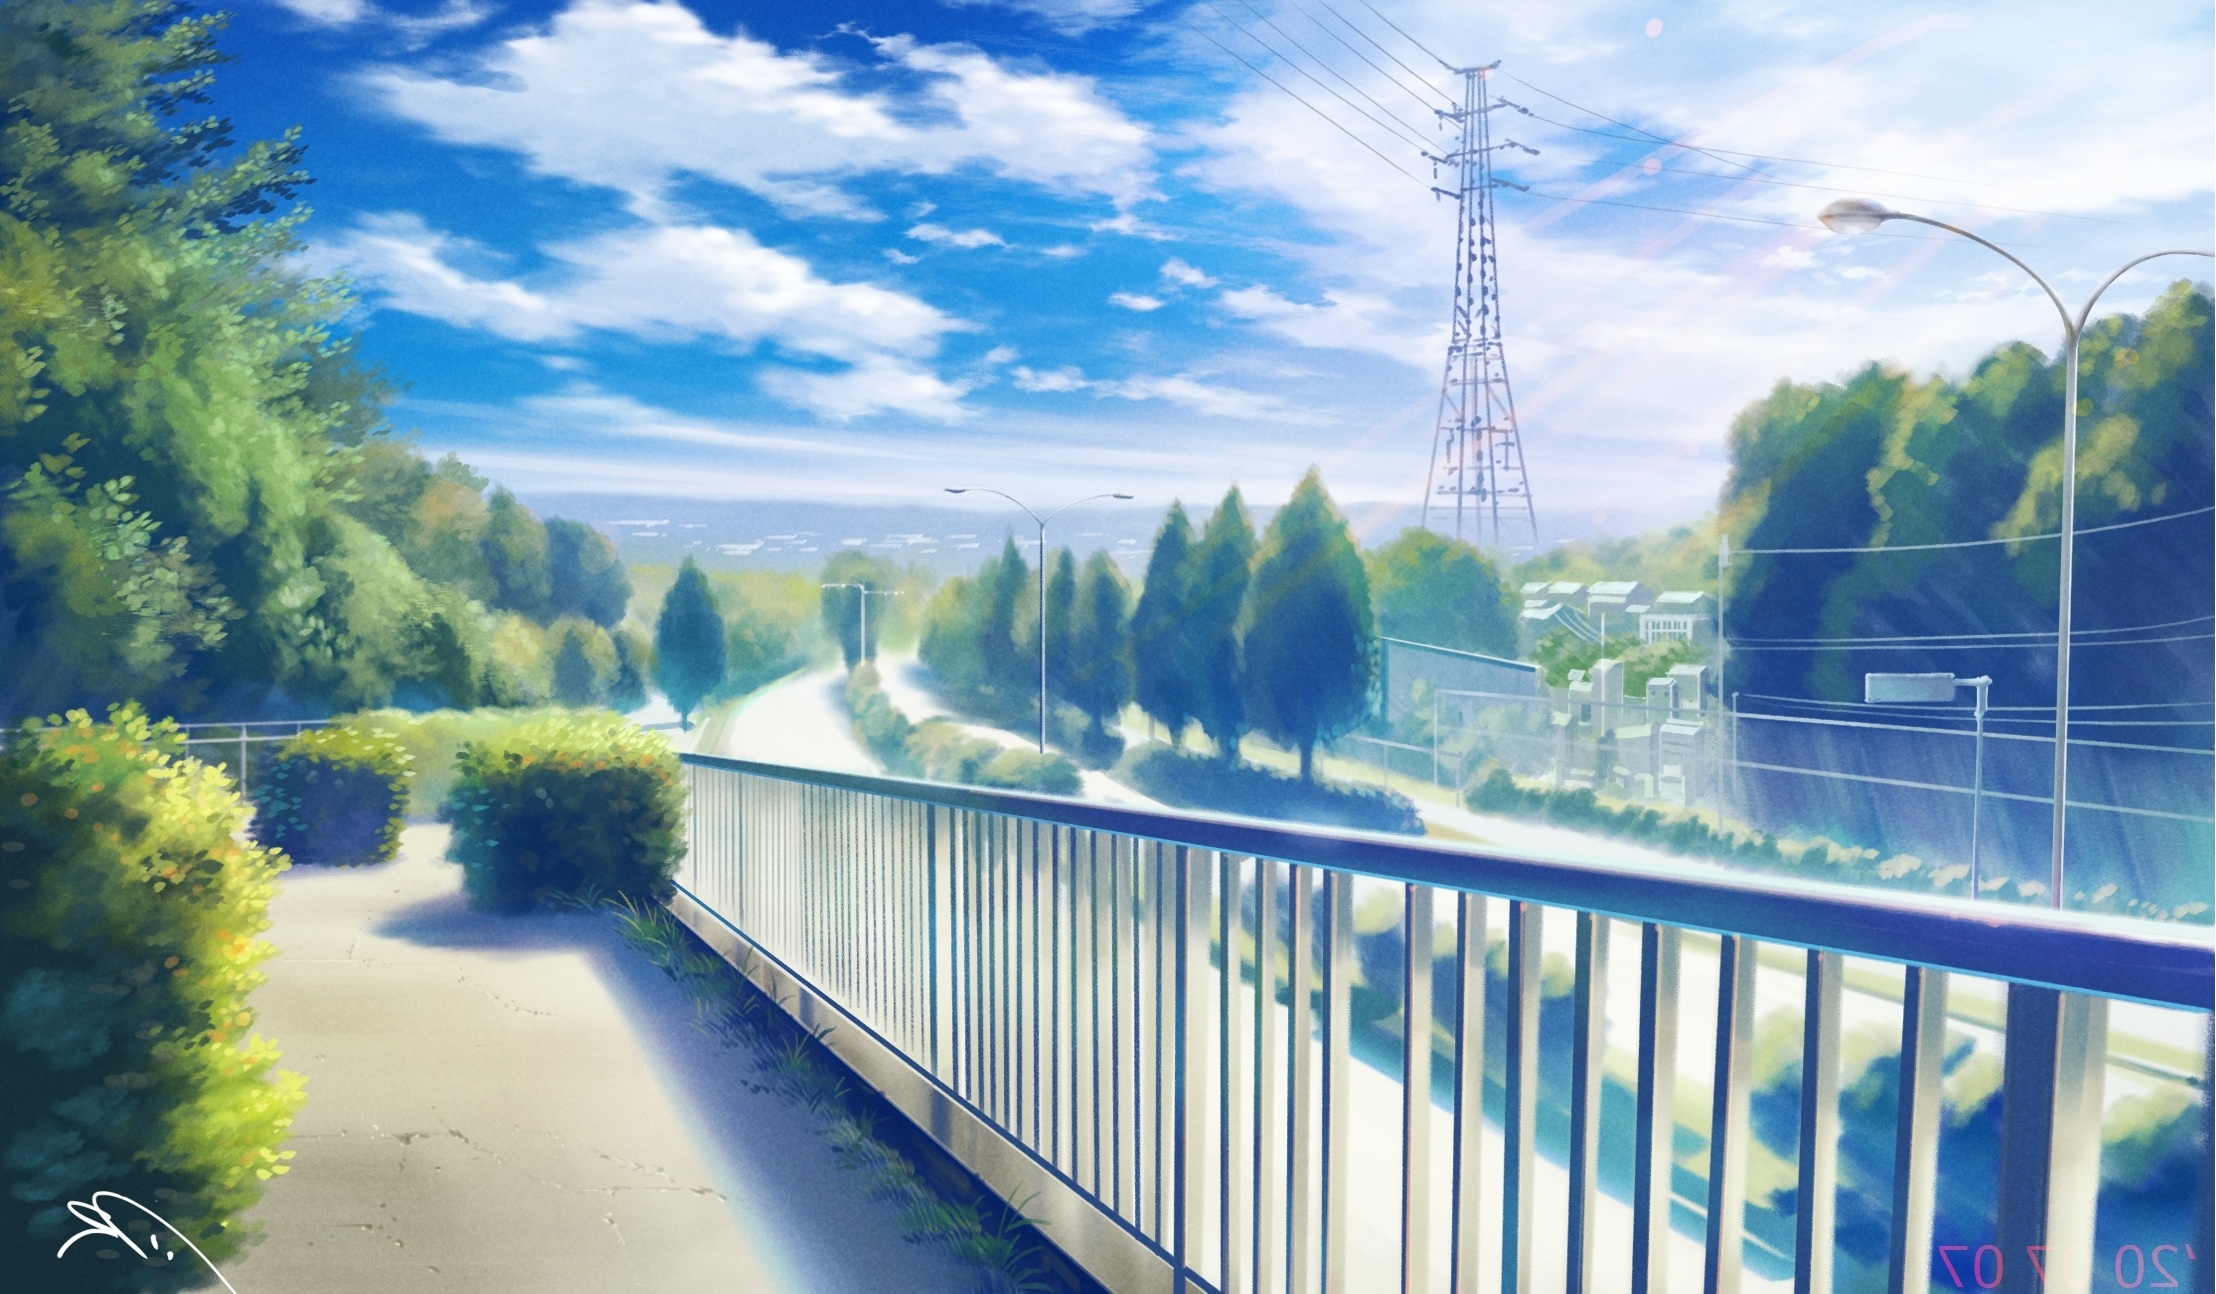 LOFI Street, Houses, Anime Manga Style Background Wallpaper Design,  Illustration, Generated By AI Stock Photo, Picture and Royalty Free Image.  Image 205960695.